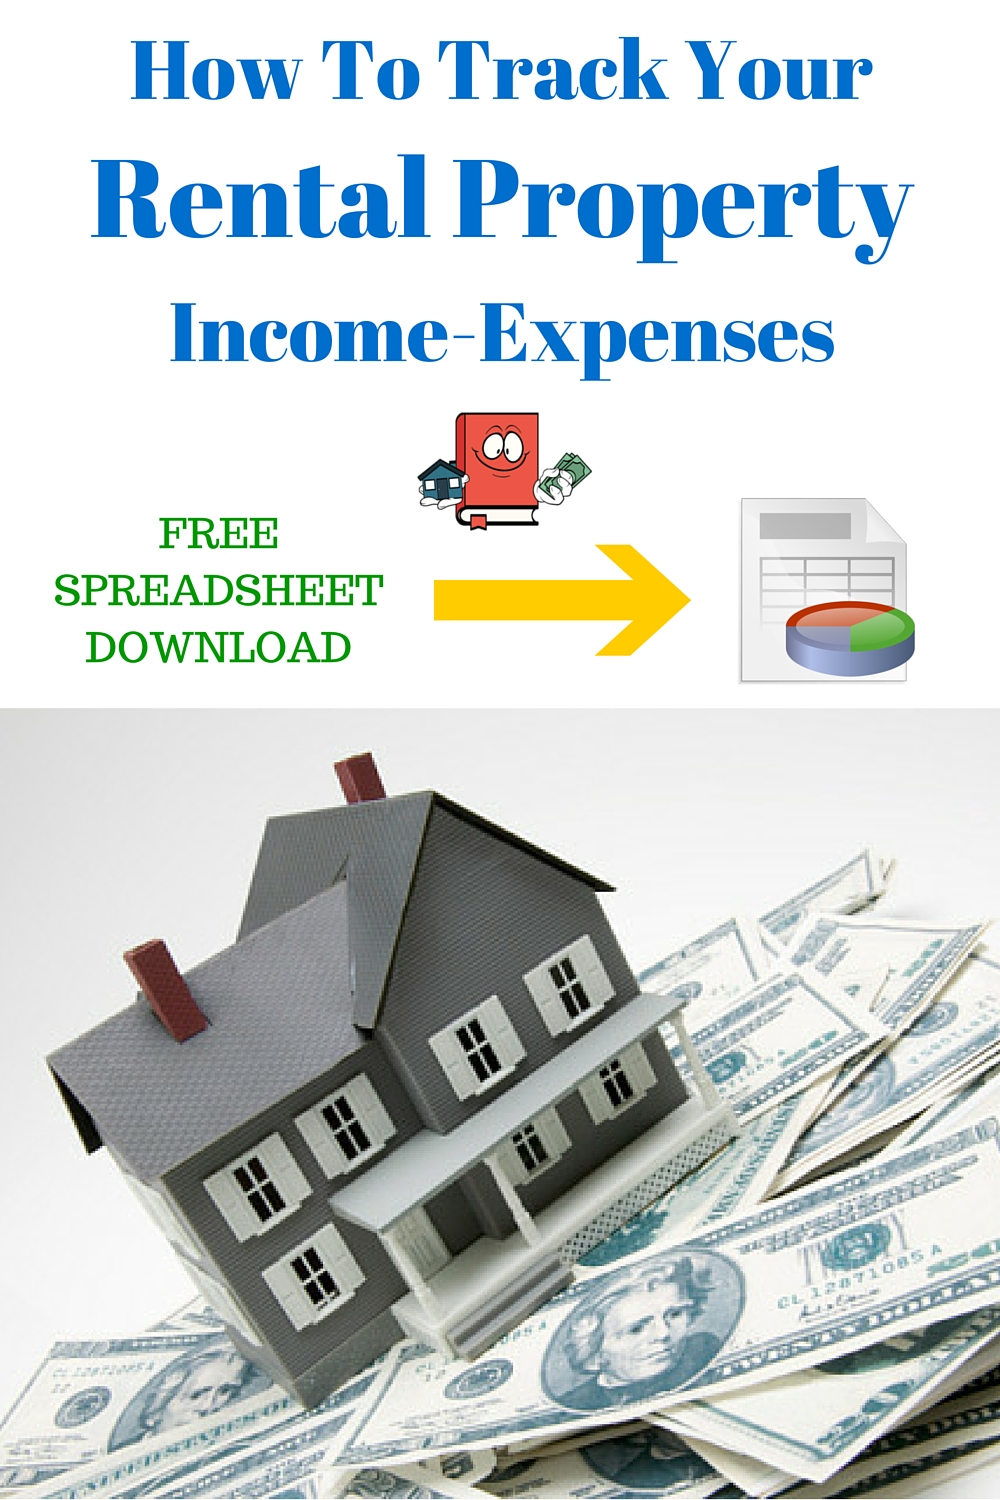 How To Keep Track Of Rental Property Expenses throughout Rental Property Spreadsheet Free